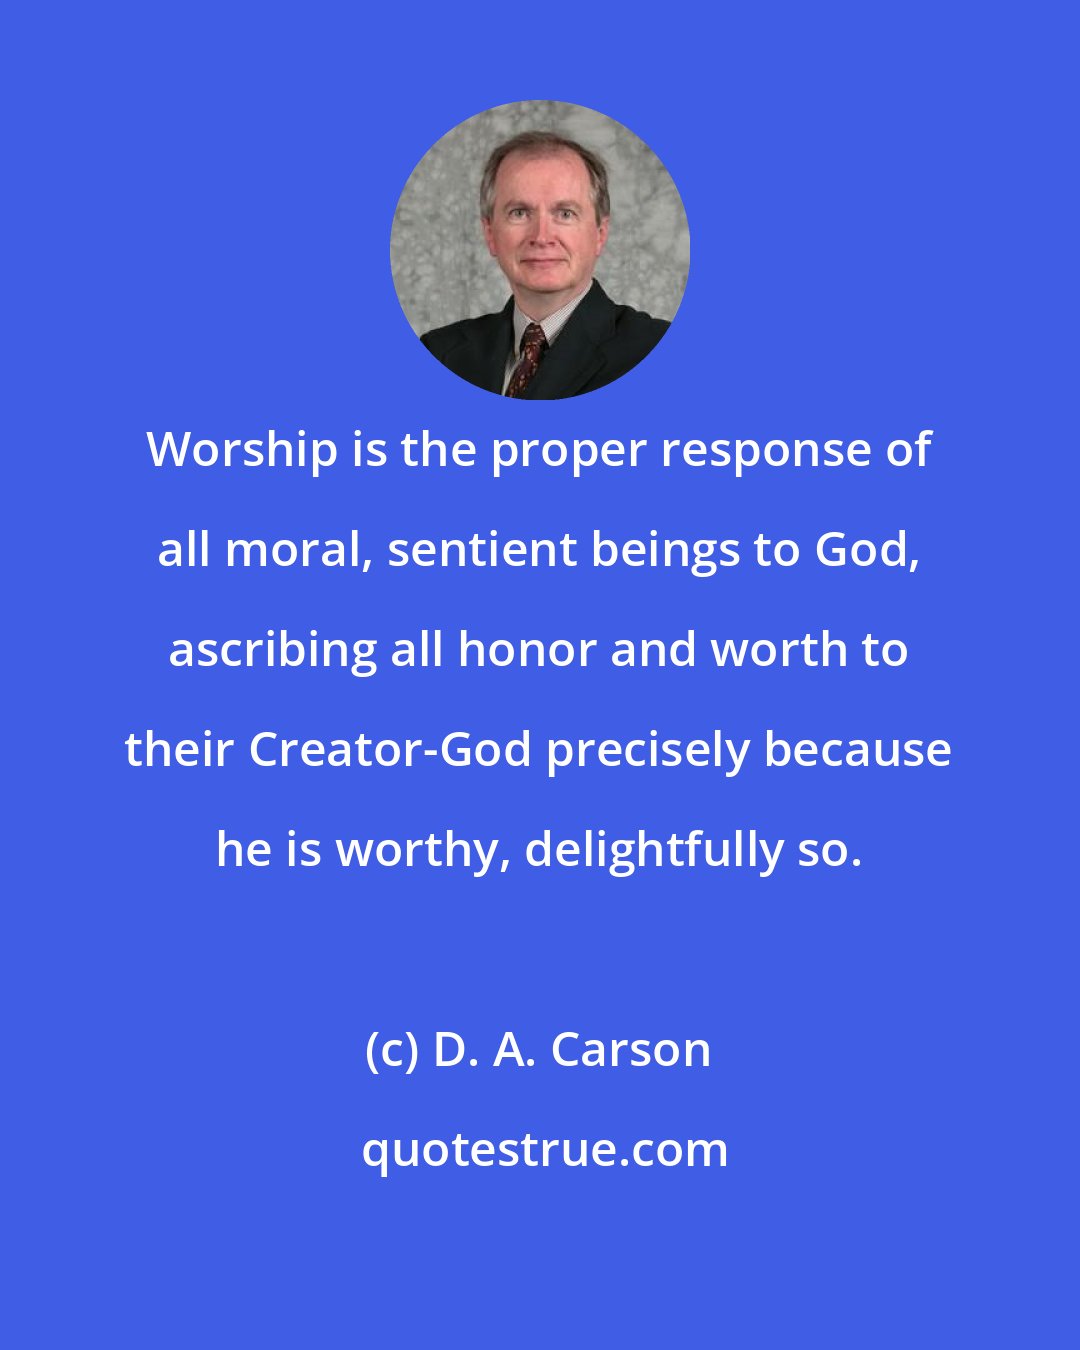 D. A. Carson: Worship is the proper response of all moral, sentient beings to God, ascribing all honor and worth to their Creator-God precisely because he is worthy, delightfully so.